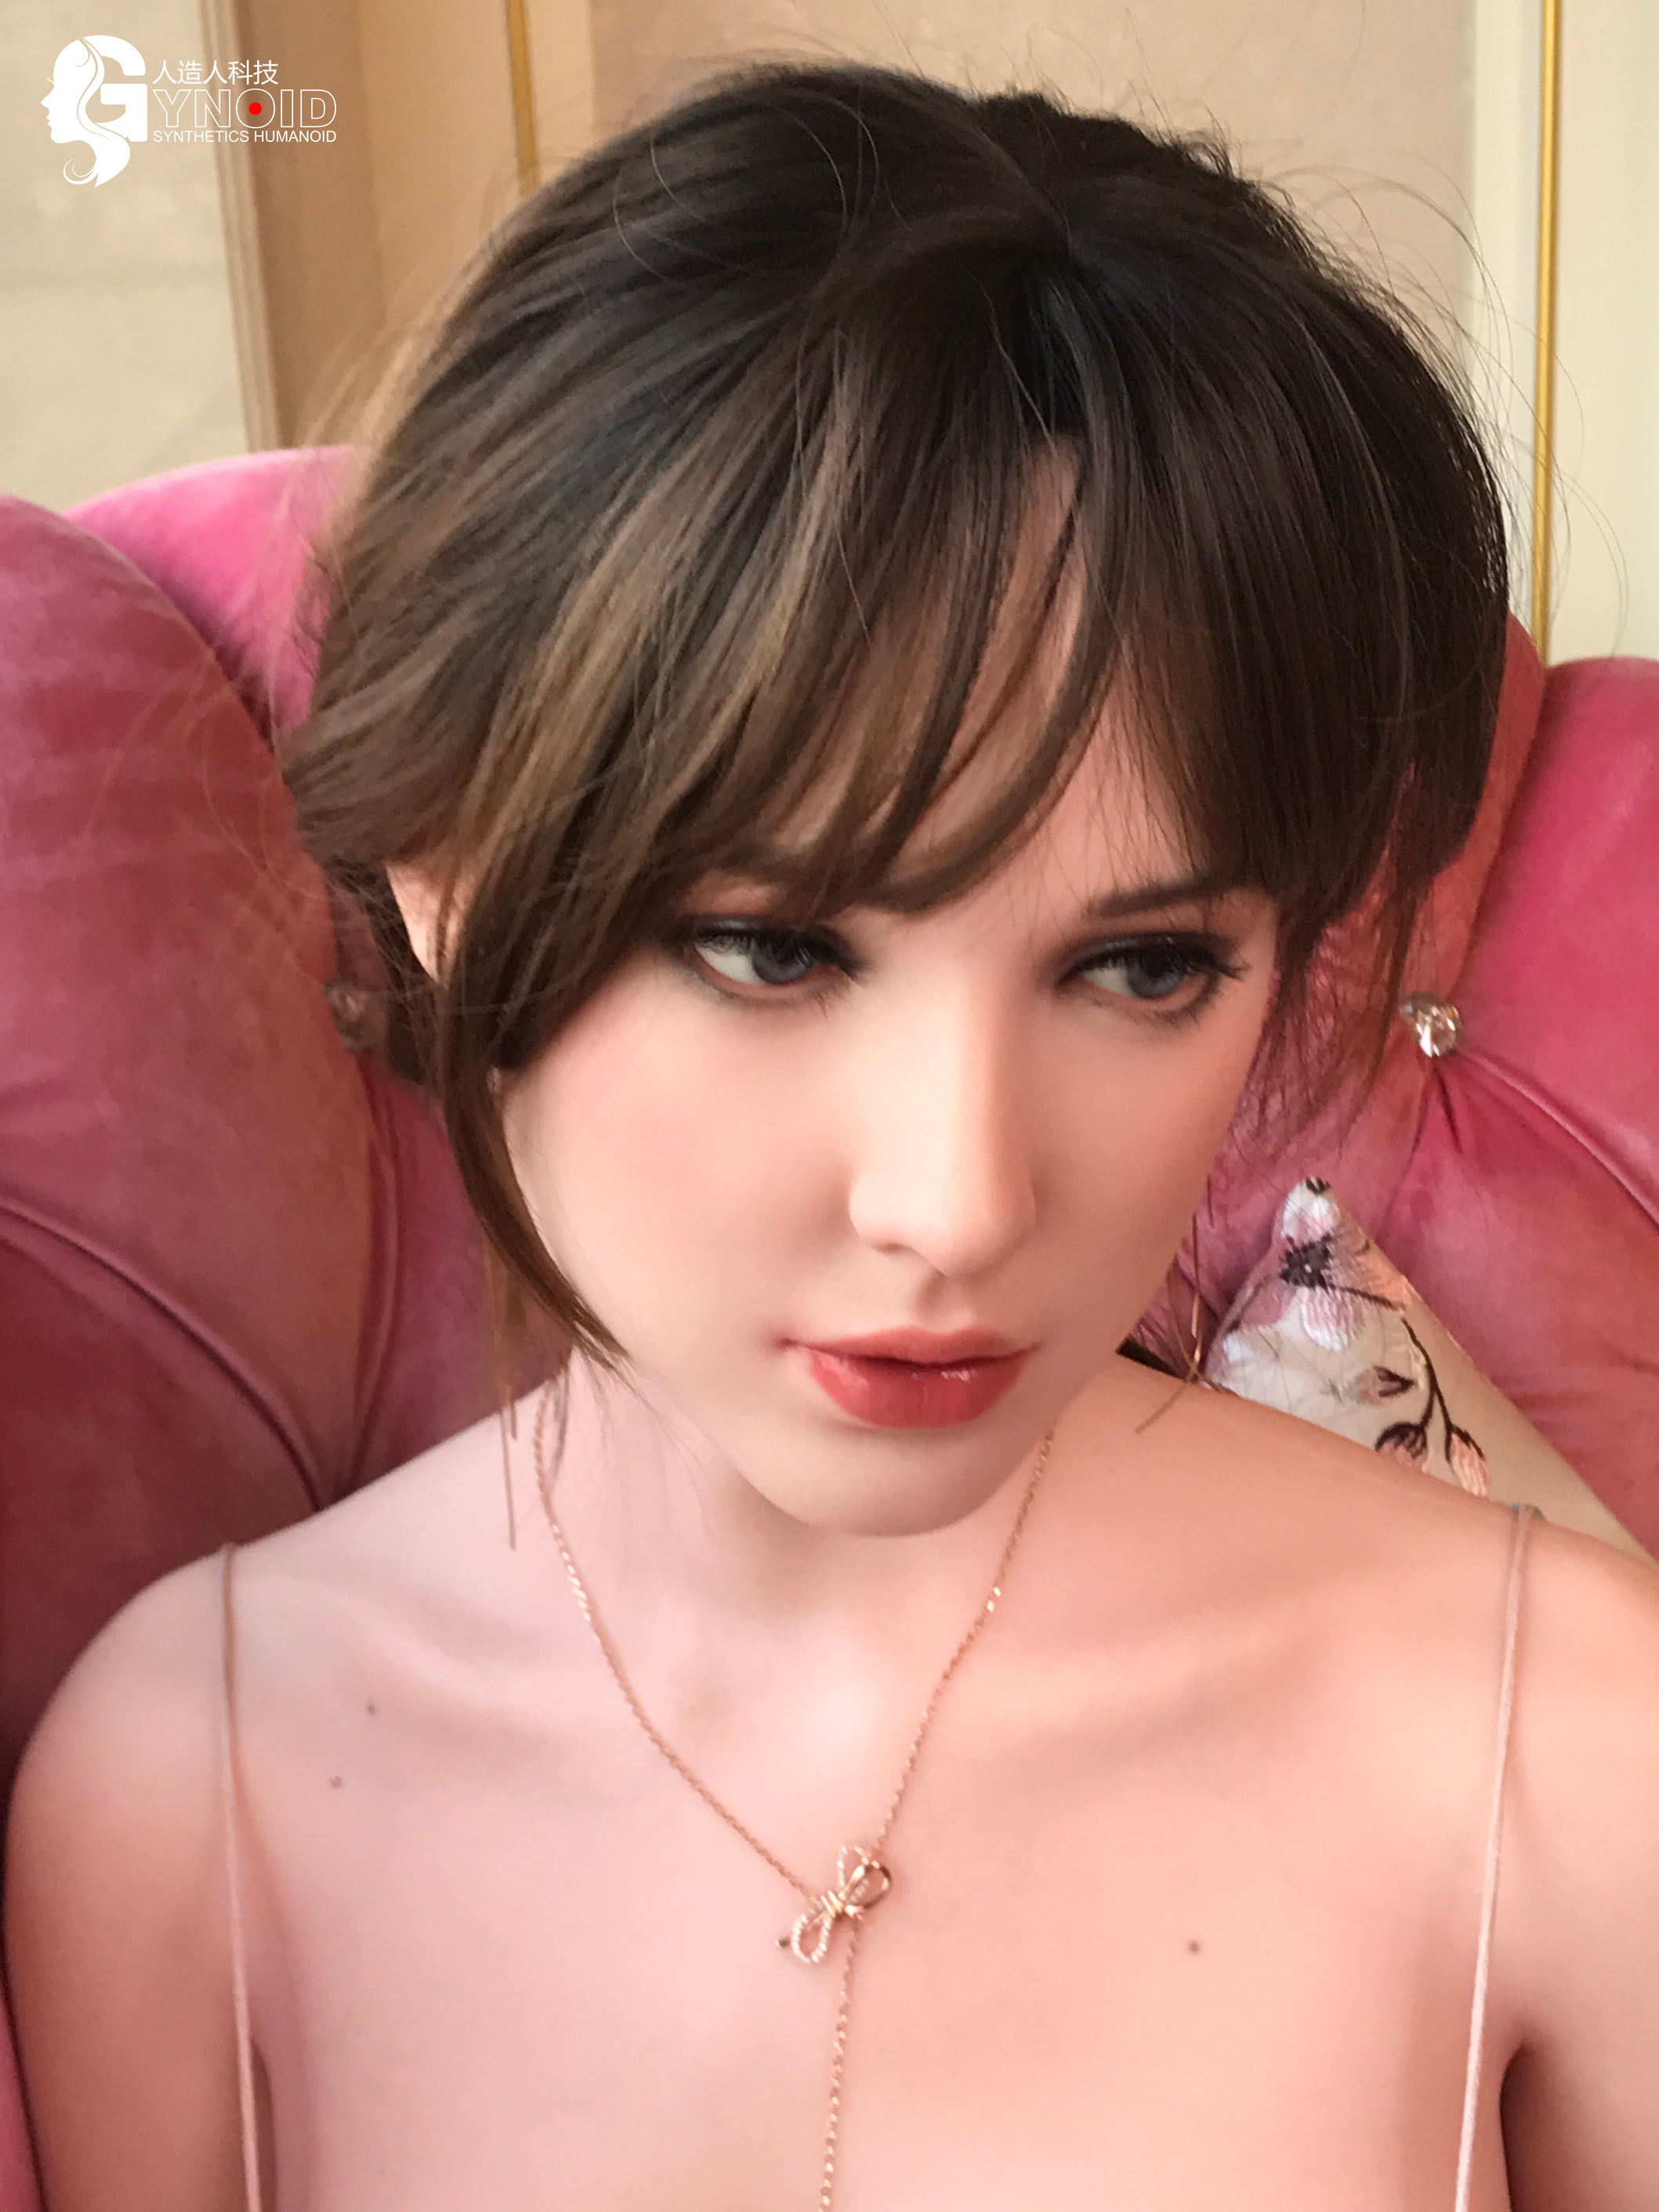 Gynoid Doll 172 cm Silicone - Laura | Buy Sex Dolls at DOLLS ACTUALLY